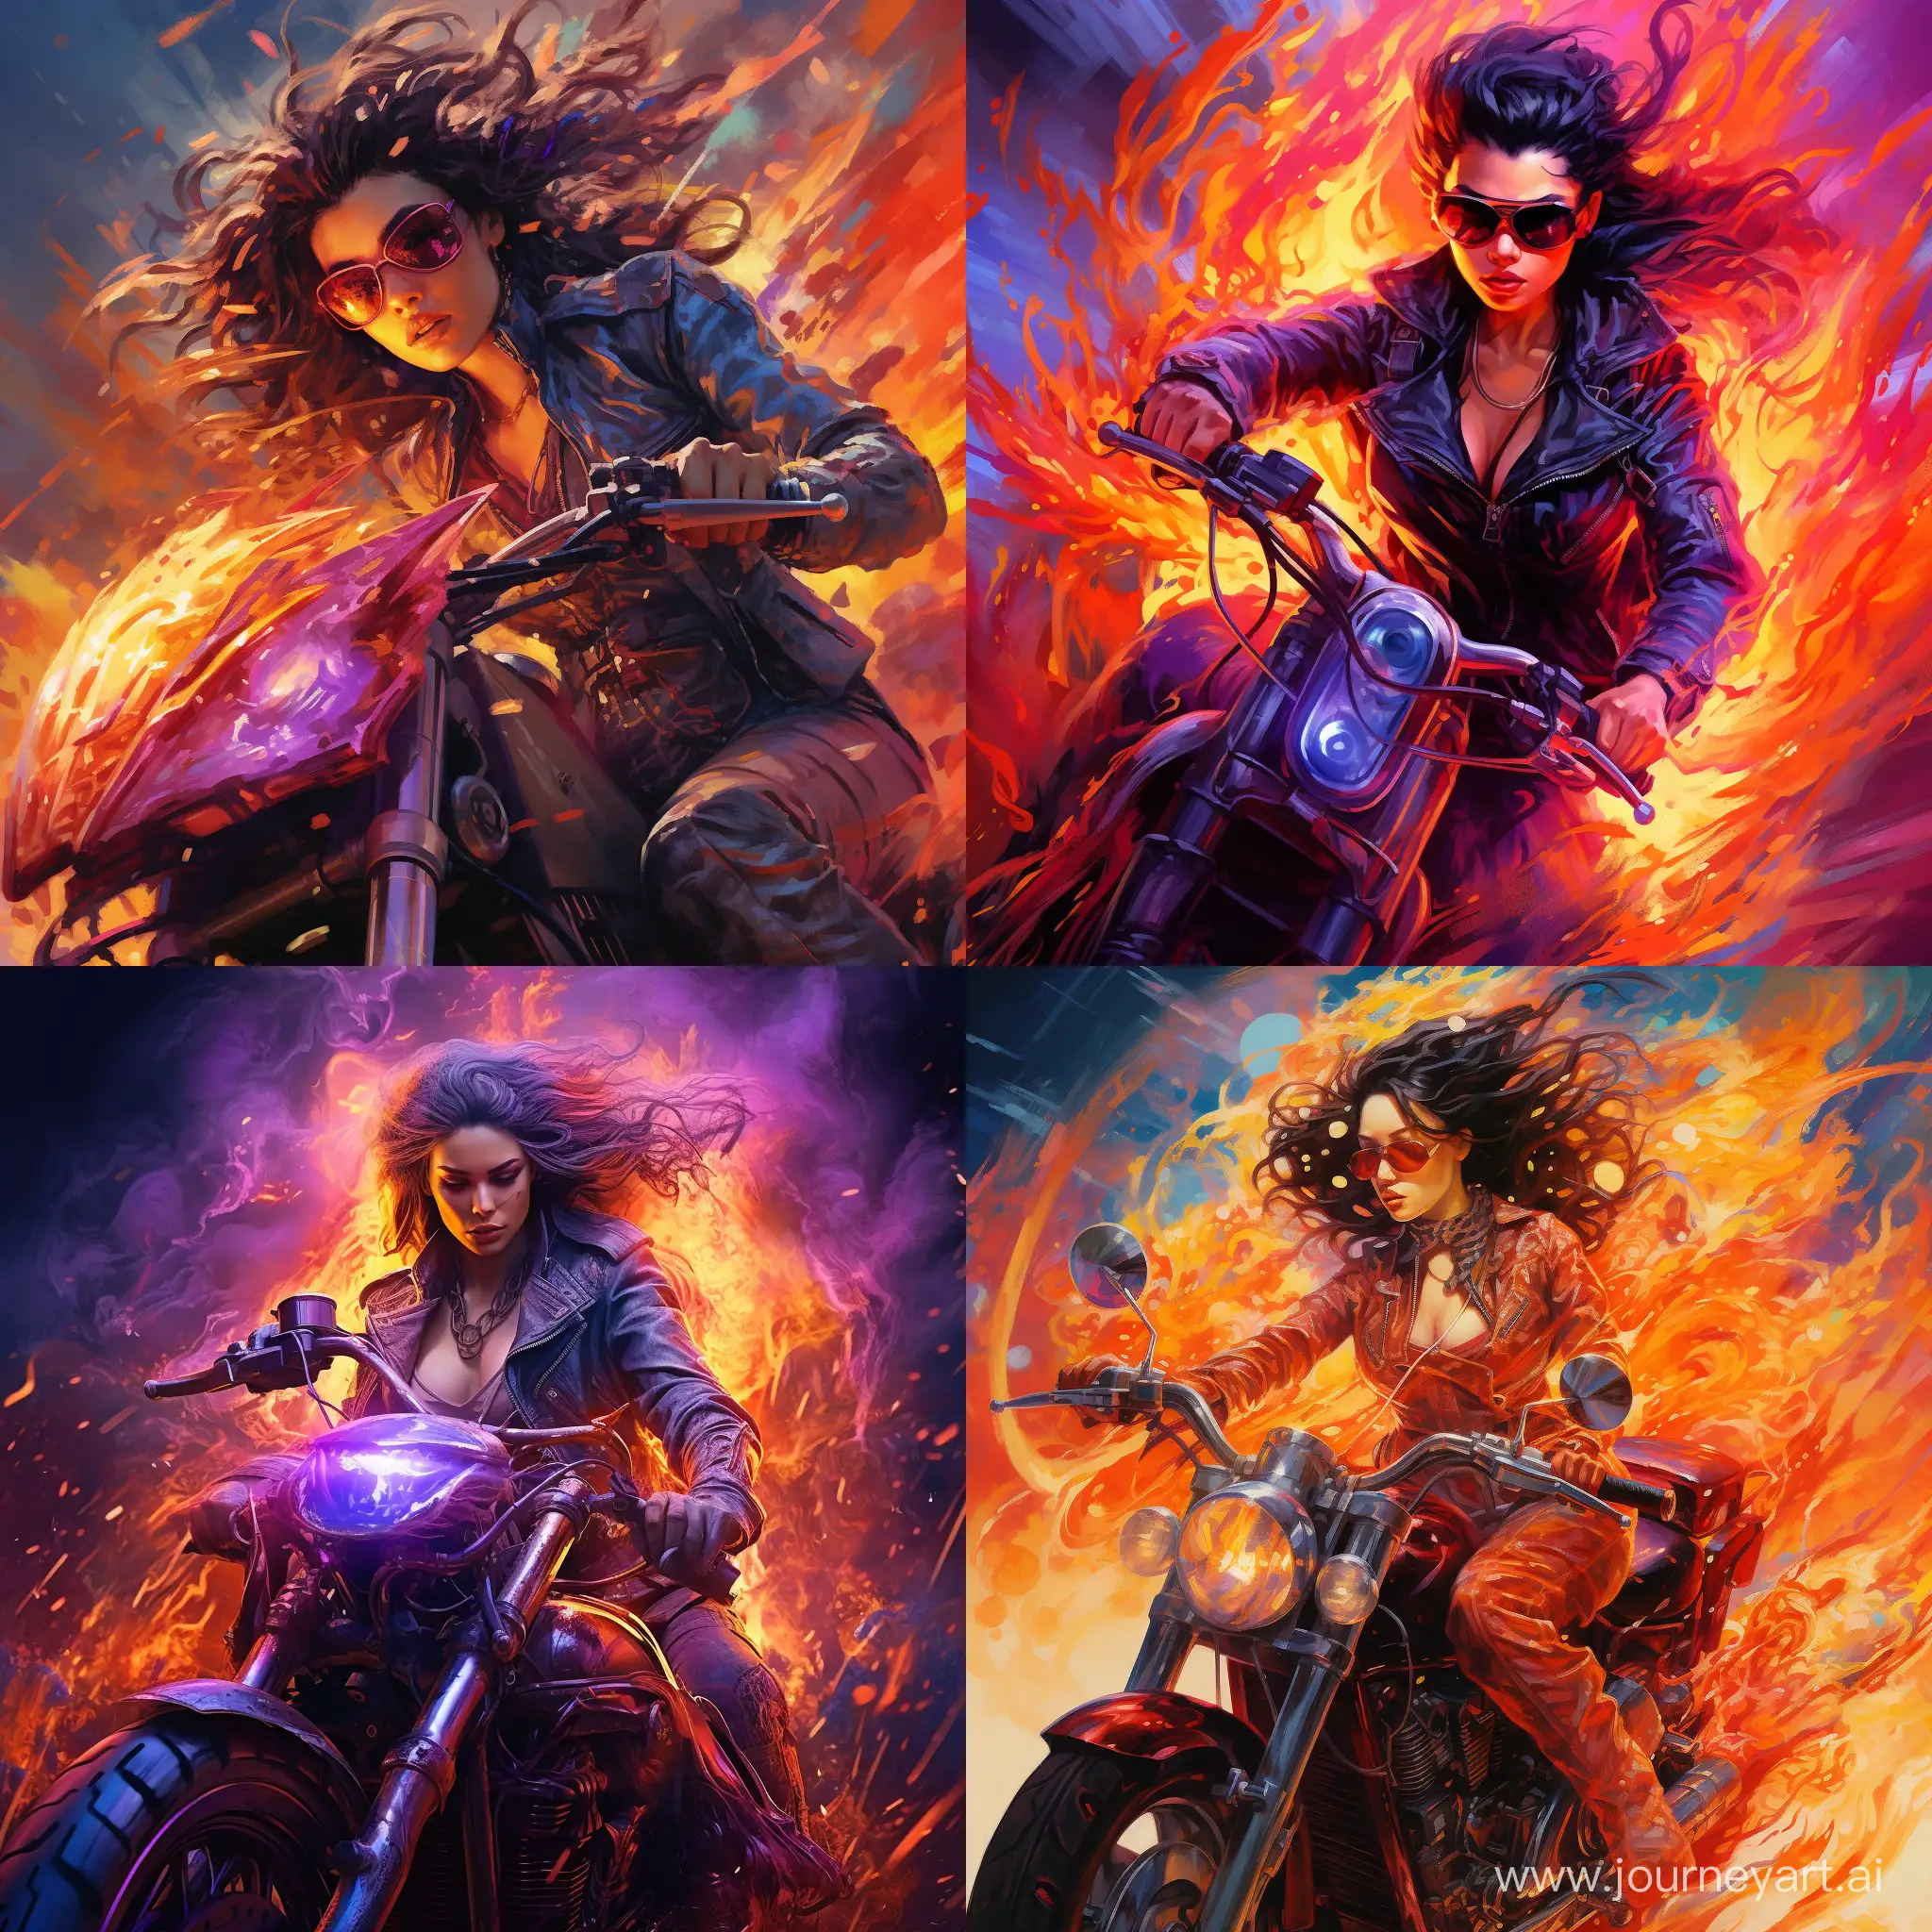 Colorful-Outlaw-Biker-and-Beautiful-Female-Riding-FireEngulfed-Motorcycle